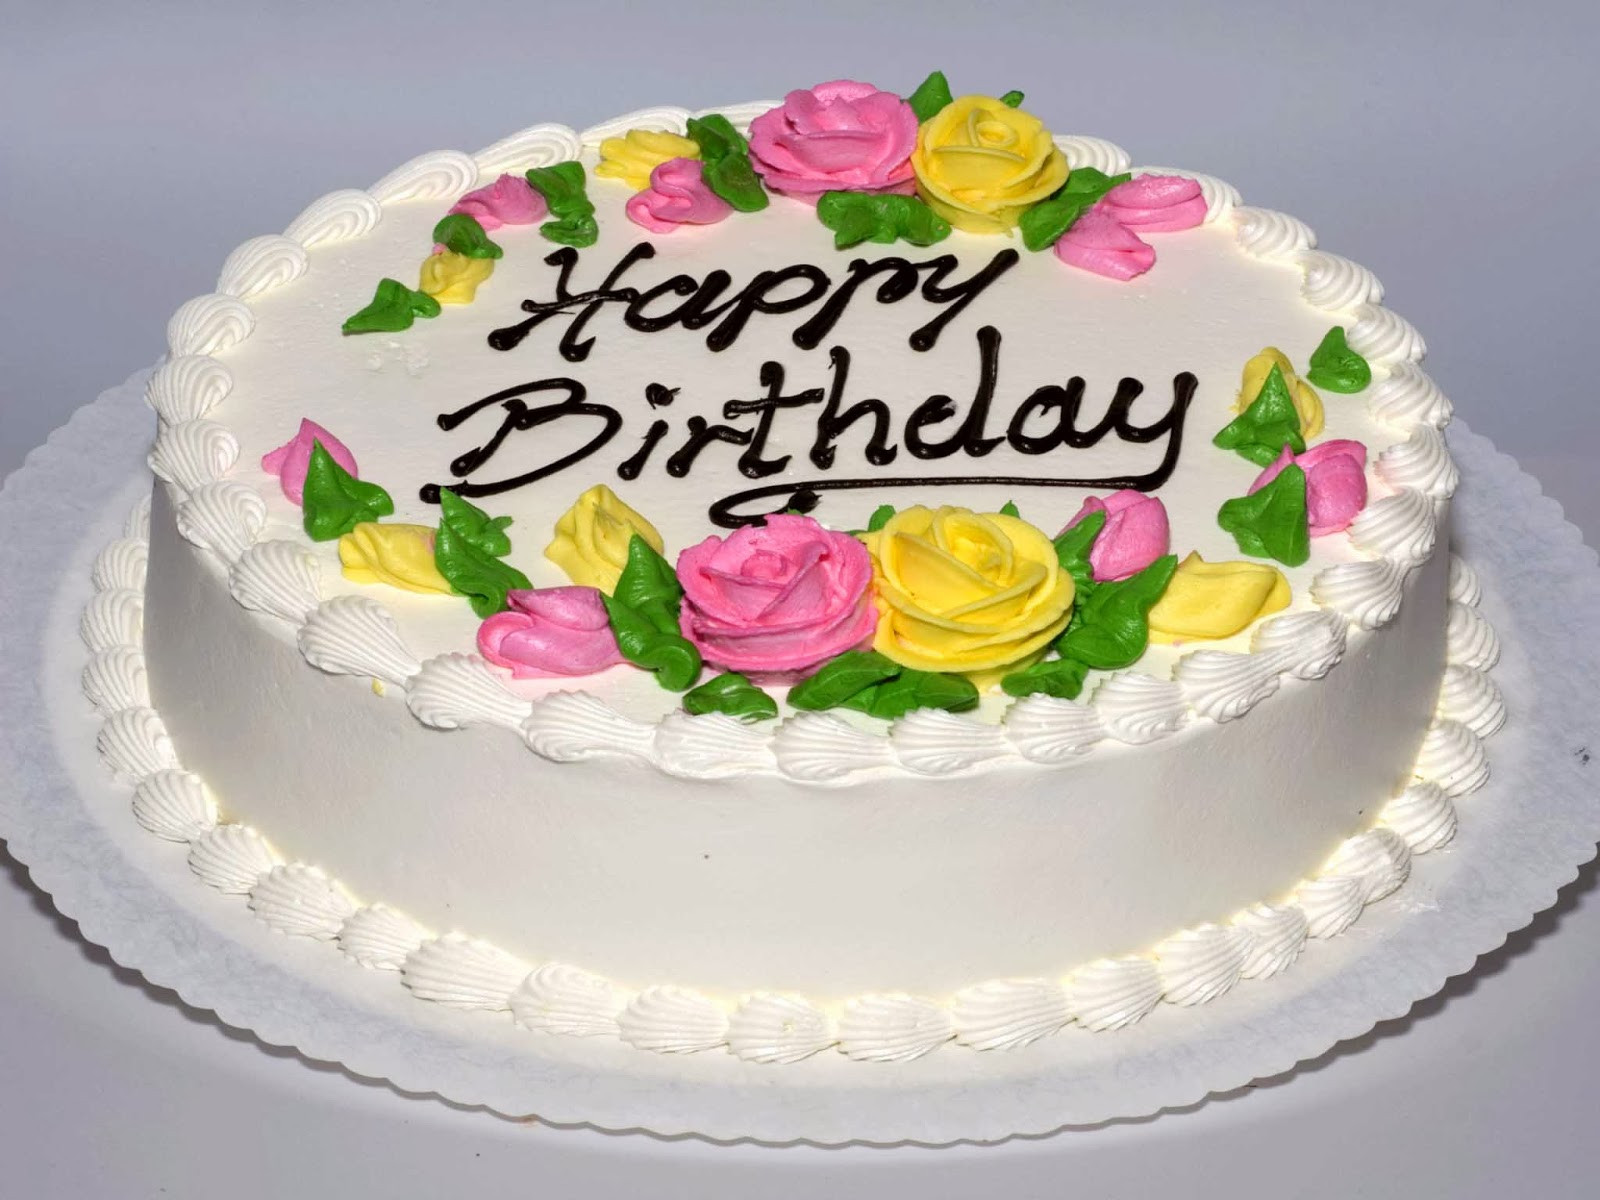 Birthday Cake Images Free Download
 Lovable Happy Birthday Greetings free